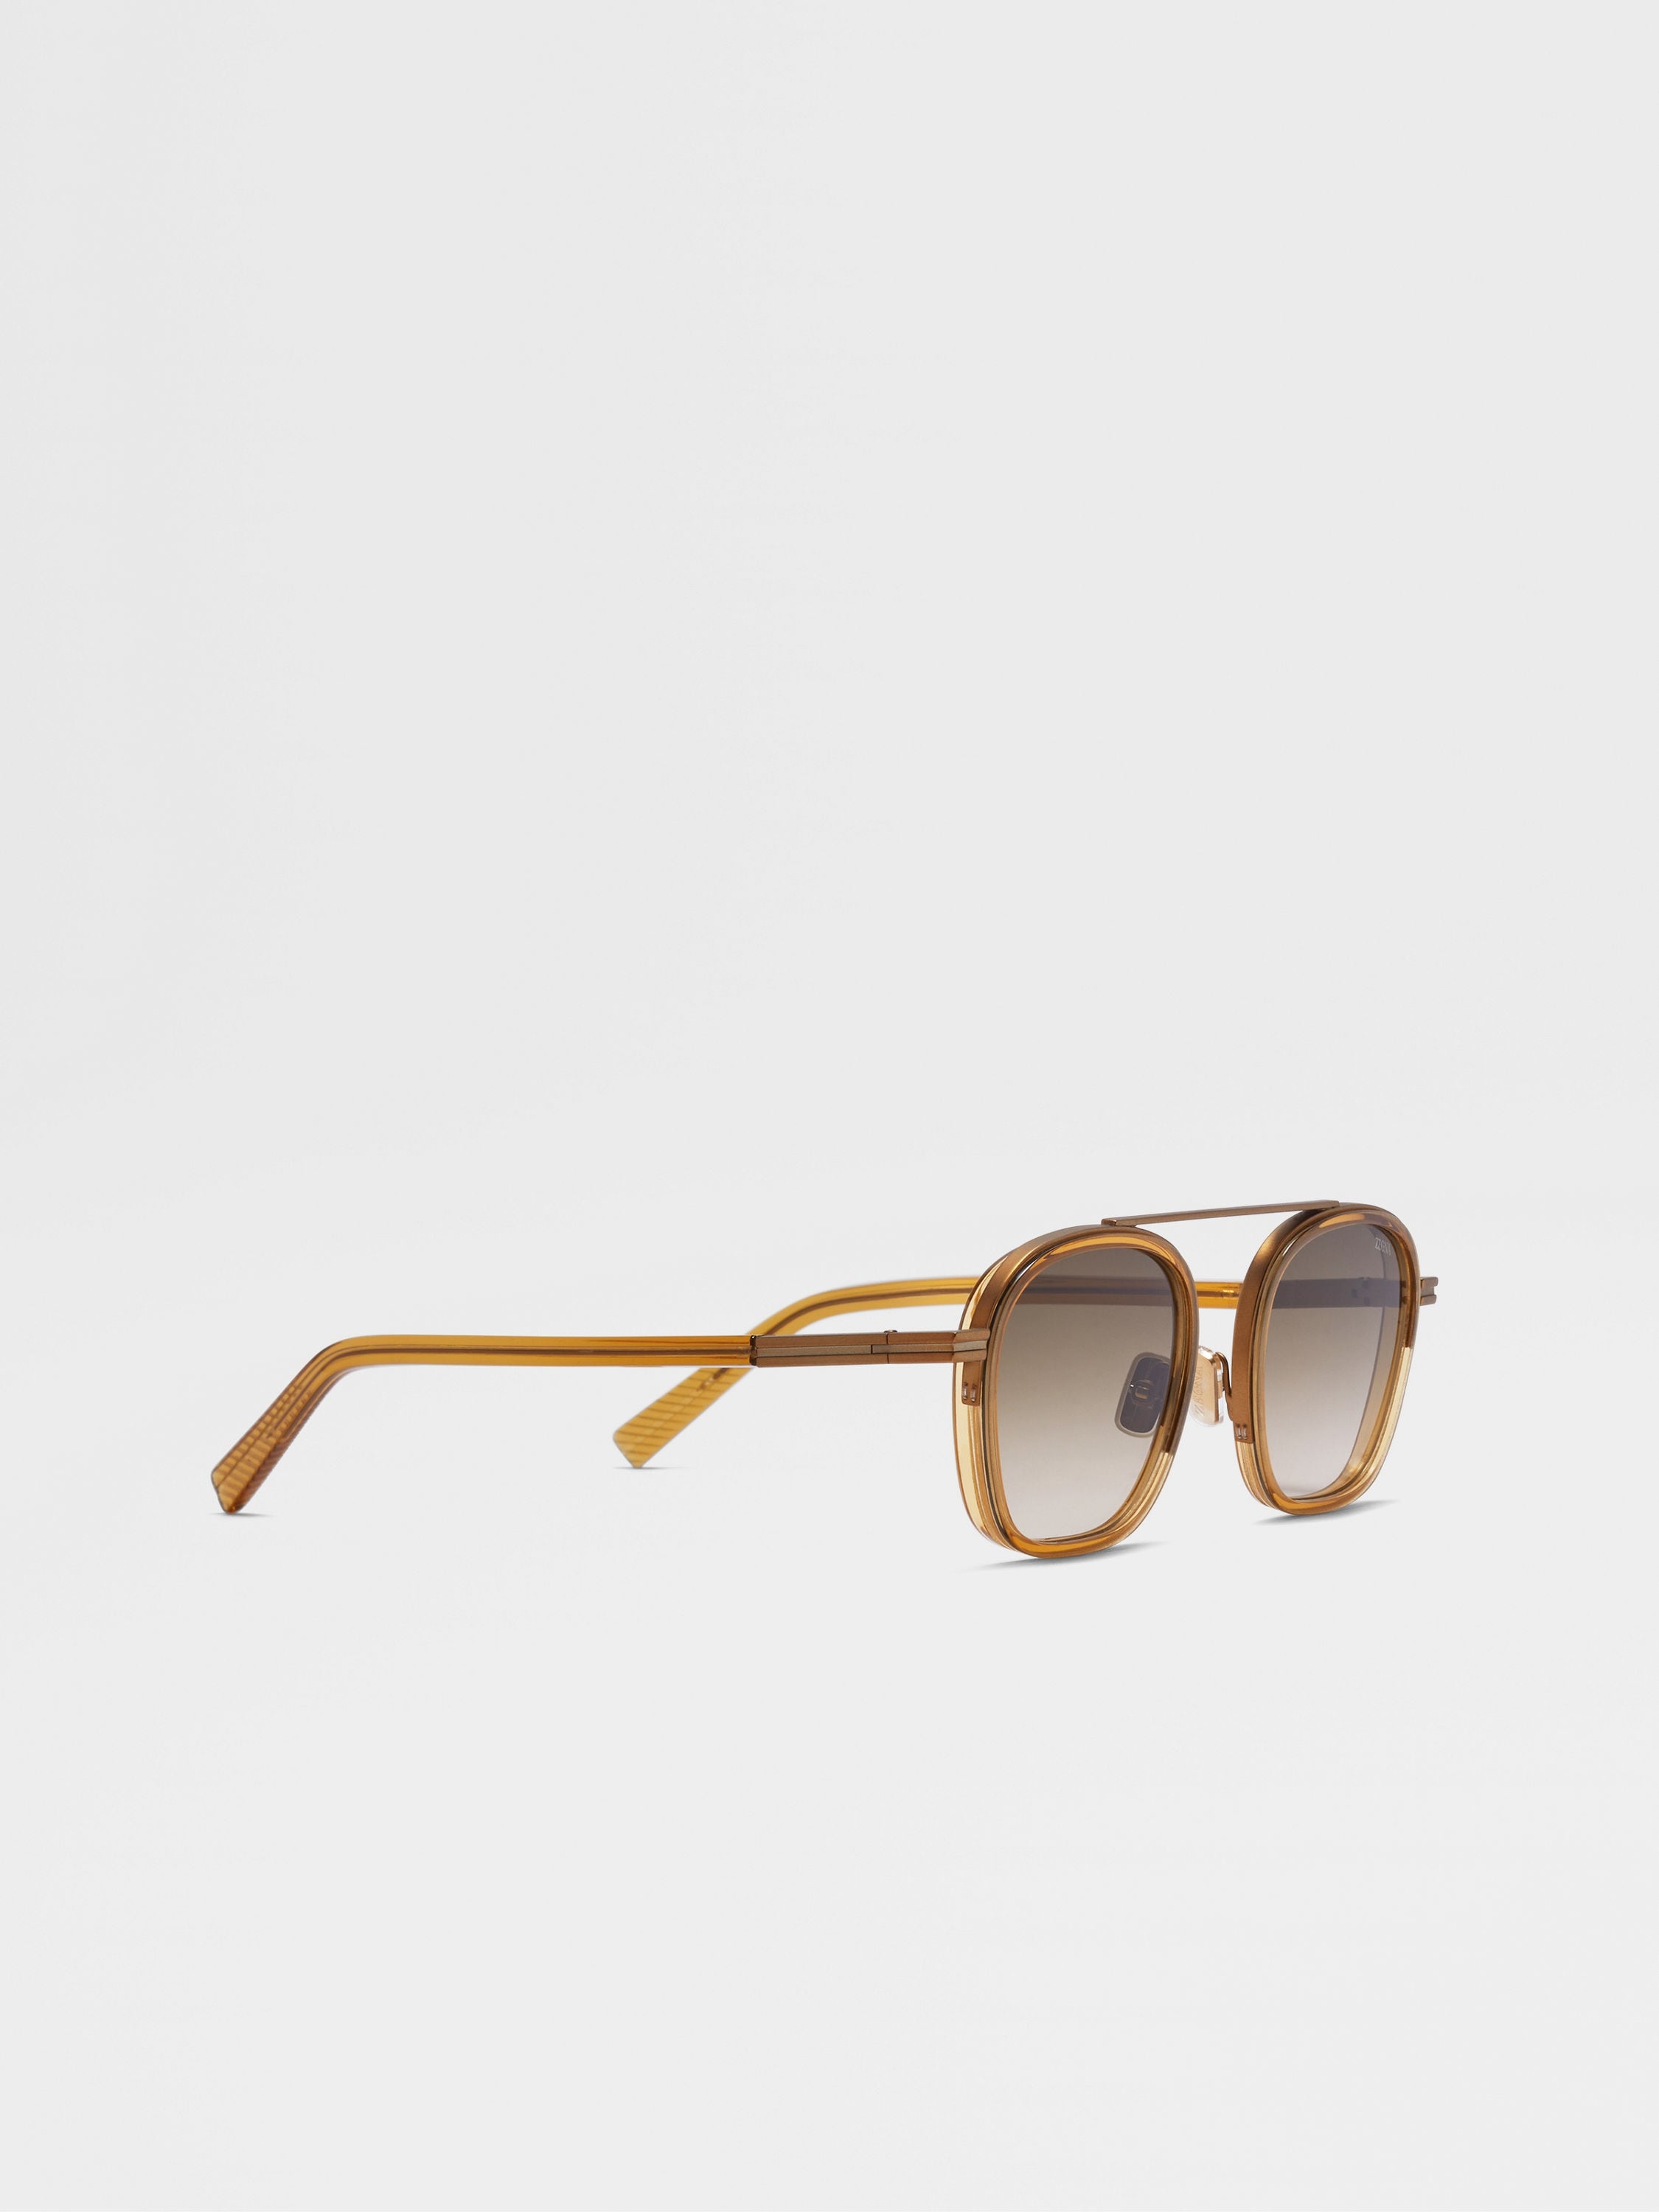 TRANSPARENT GOLDEN SYRUP ORIZZONTE I ACETATE AND METAL SUNGLASSES - 3